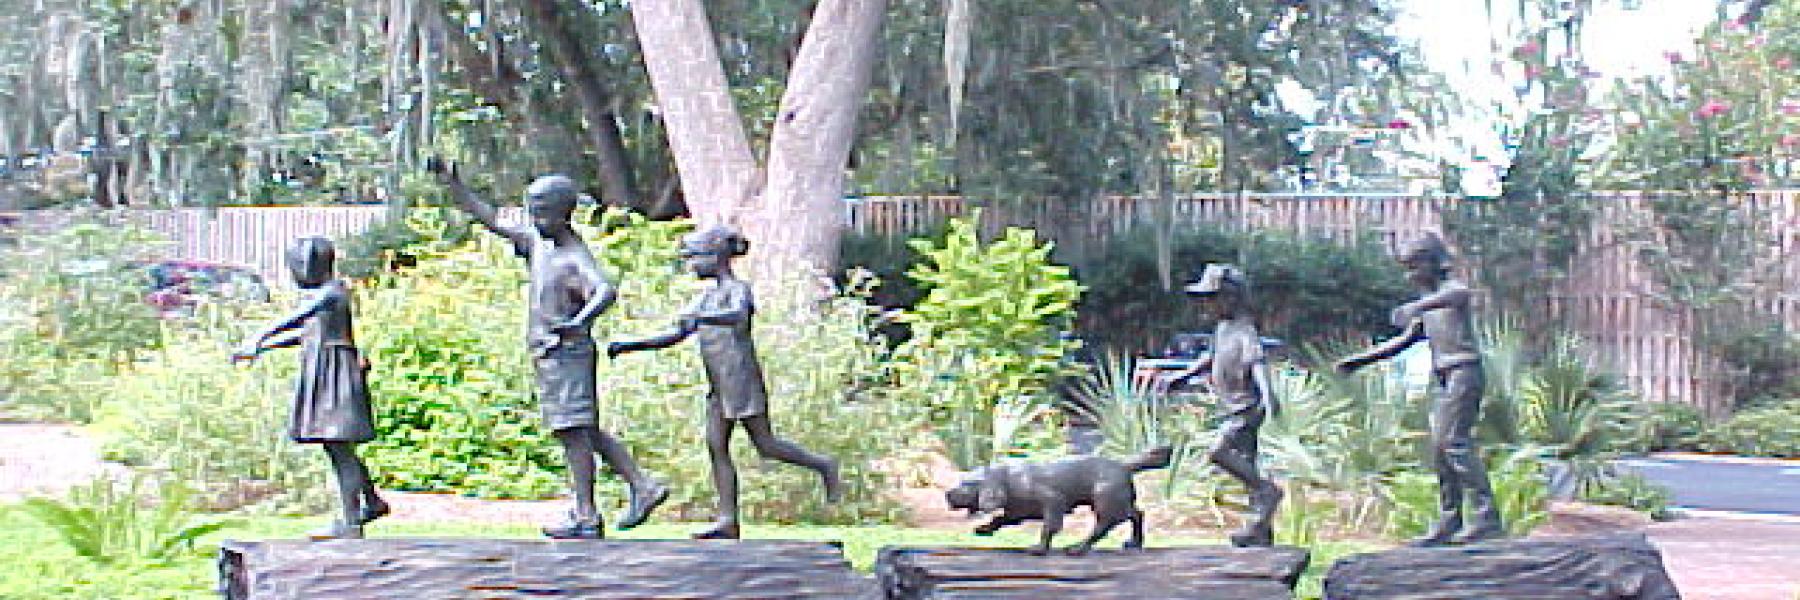 statues at governor's mansion